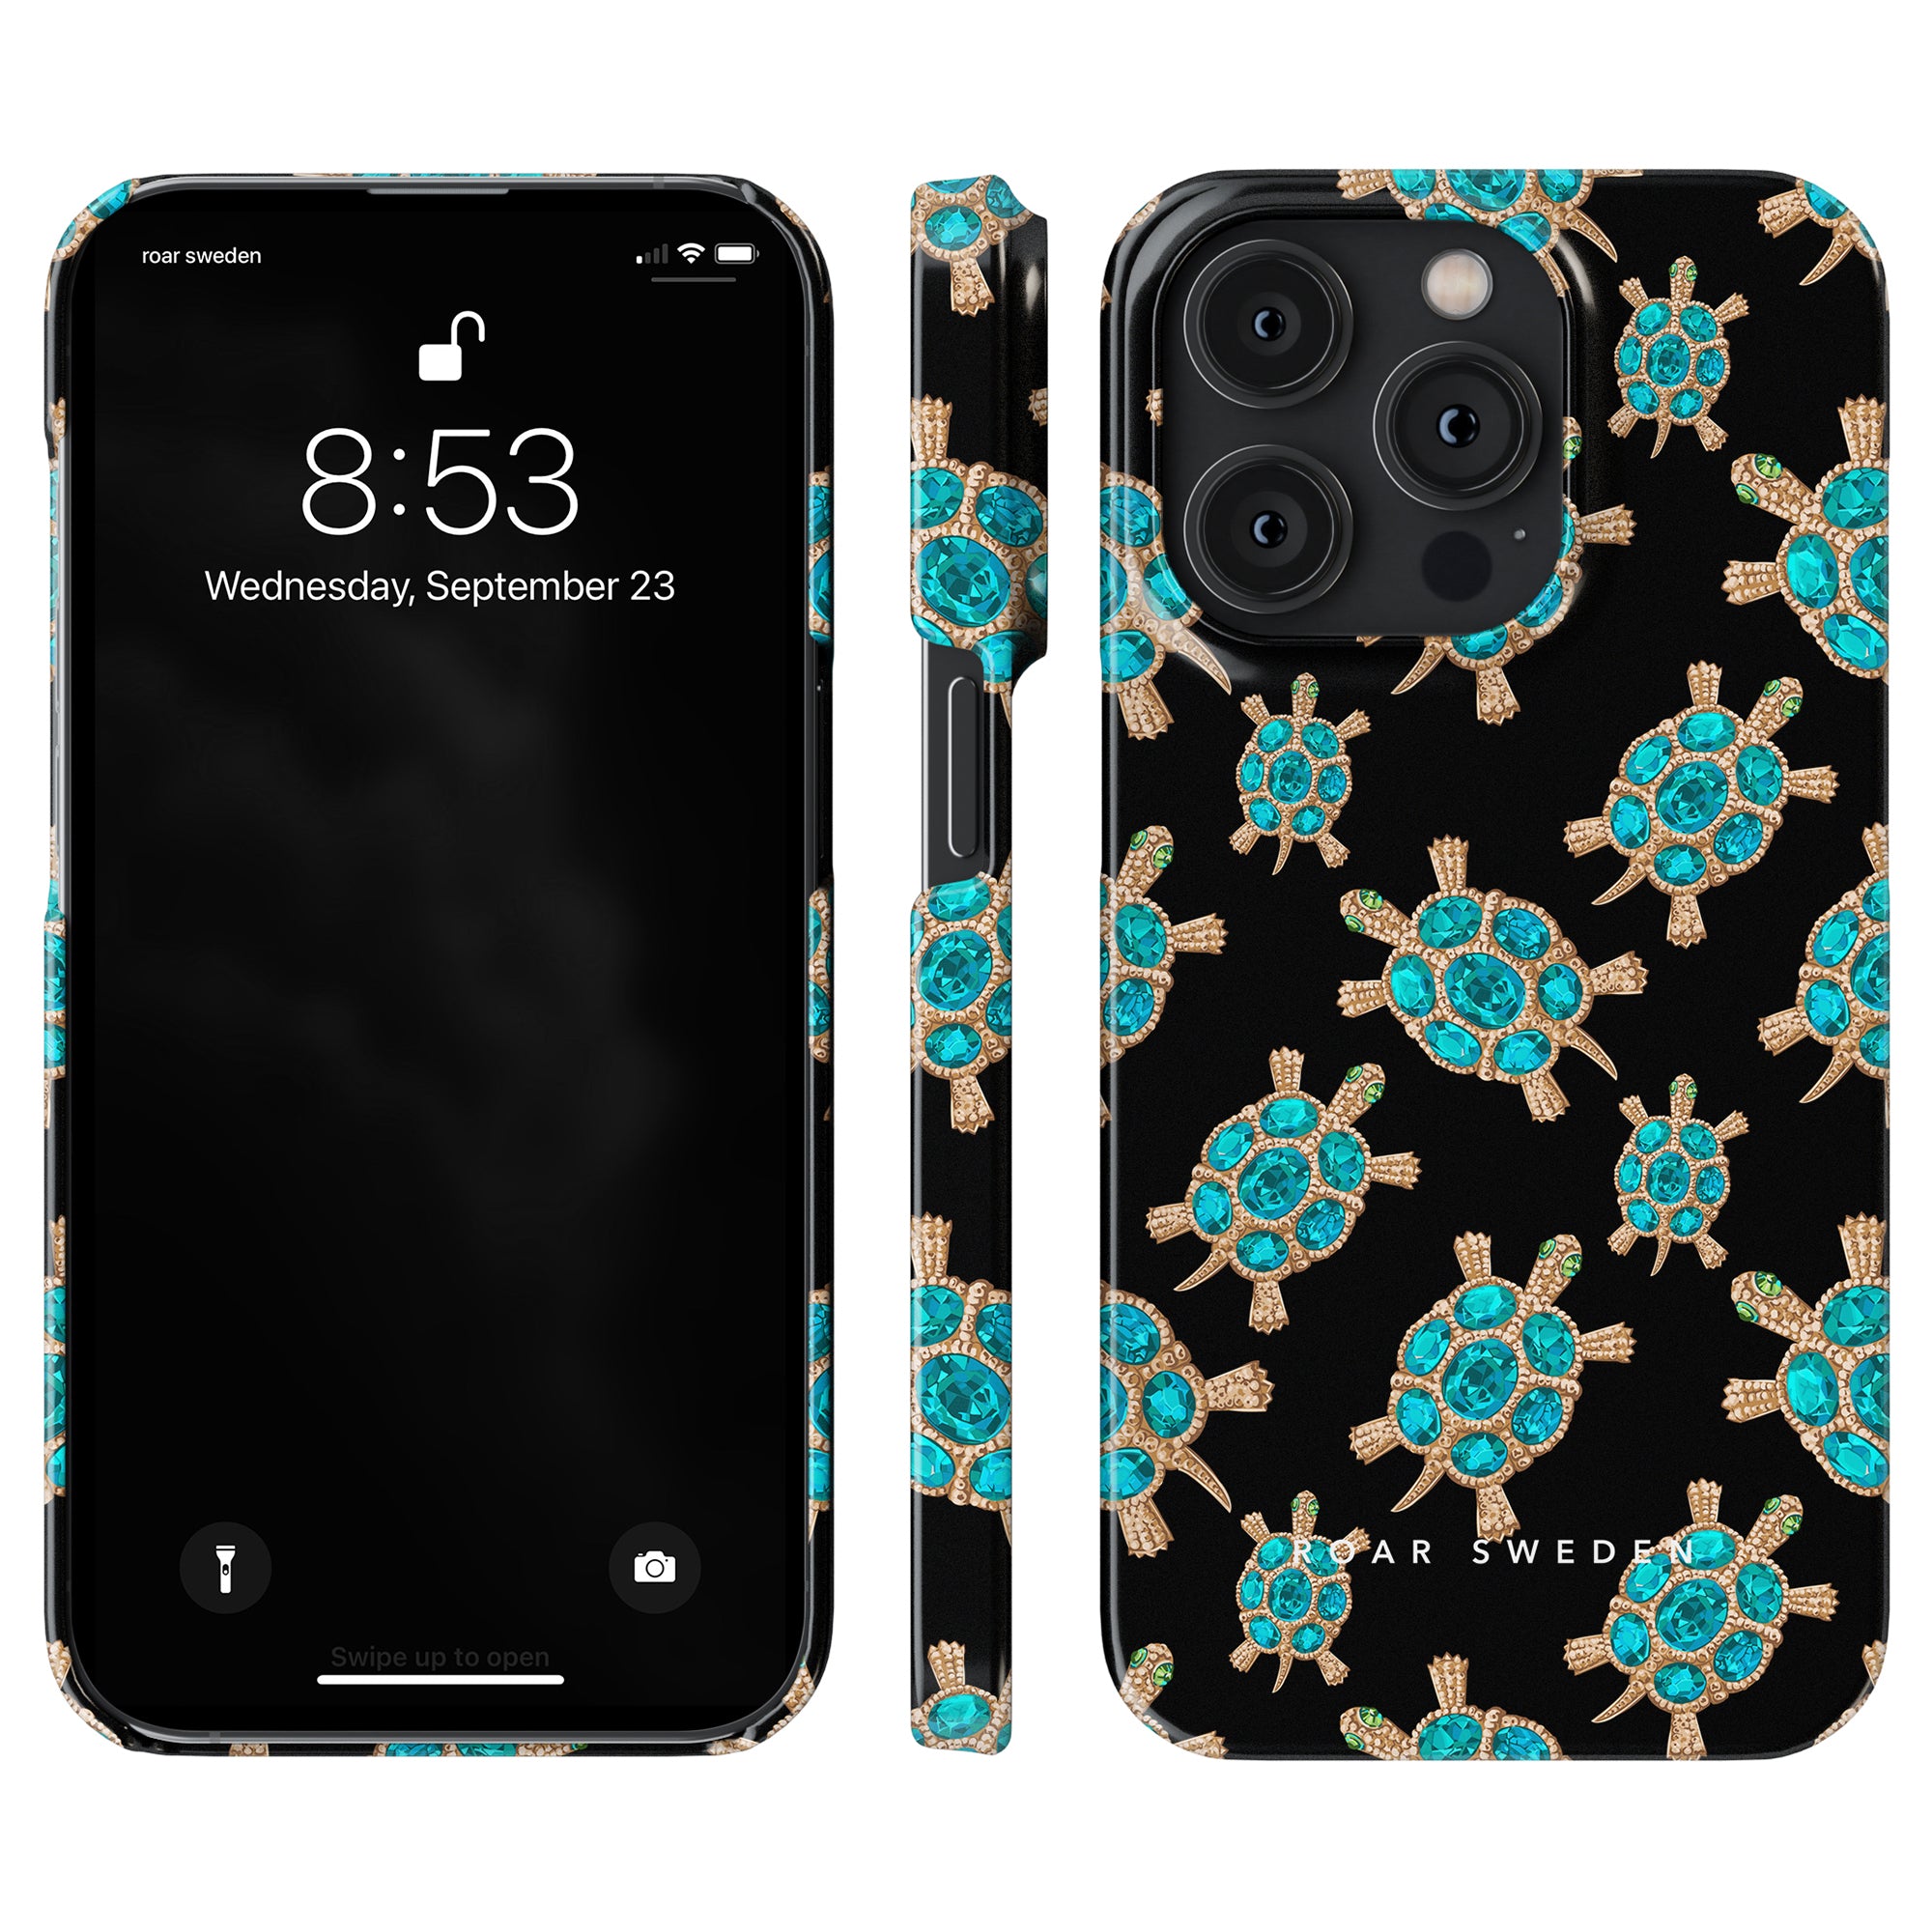 An elegant smartphone accessory, the Diamond Turtle - Slim case features a beautiful turtle pattern on its black surface.